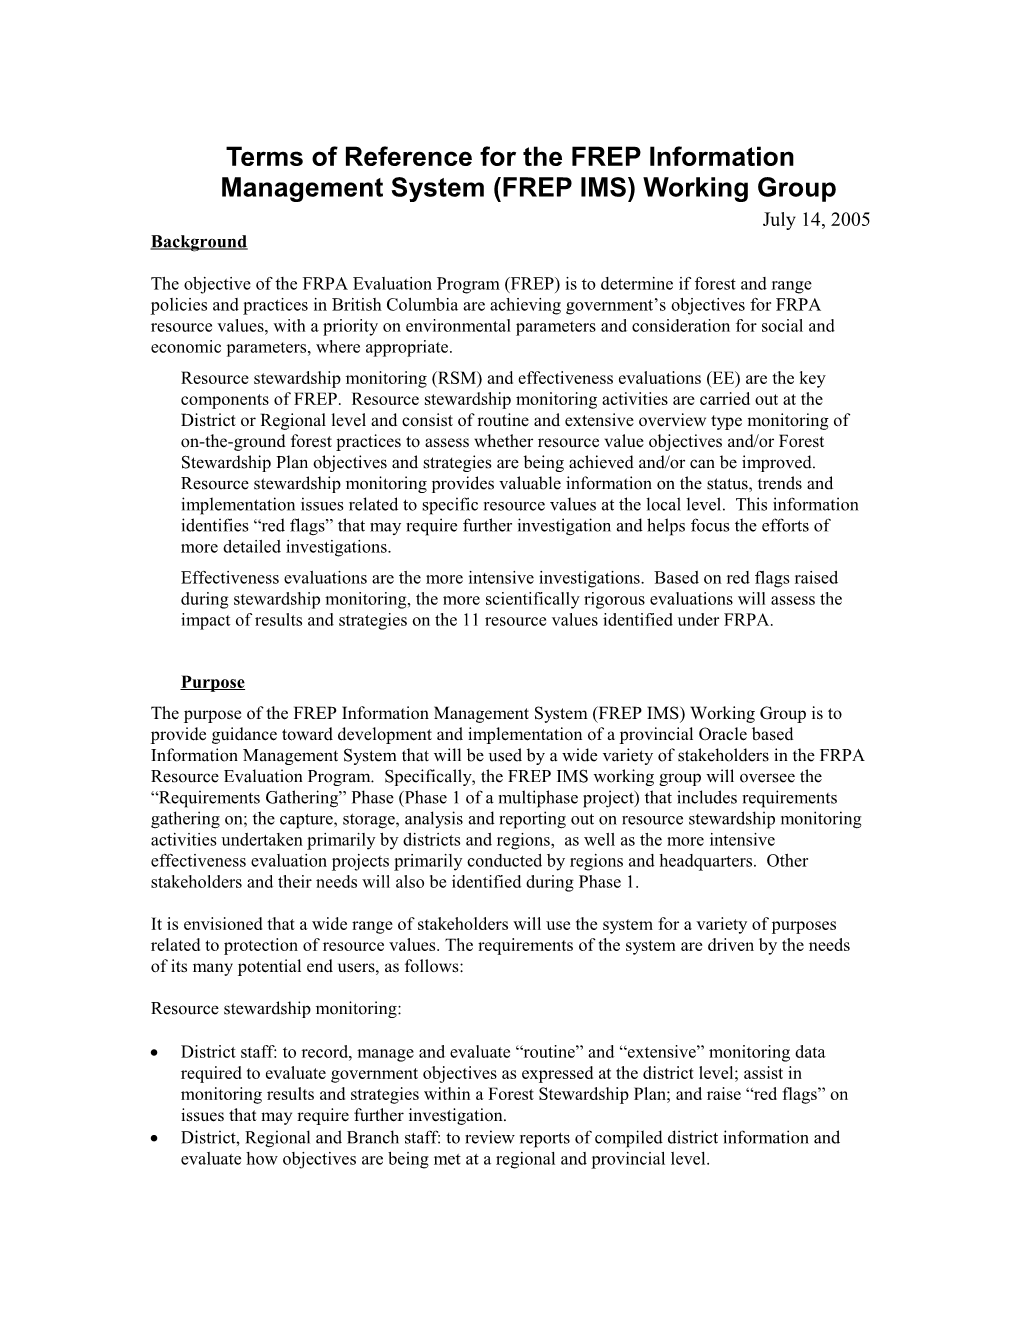 Terms of Reference for Resource Stewardship Monitoring Committee